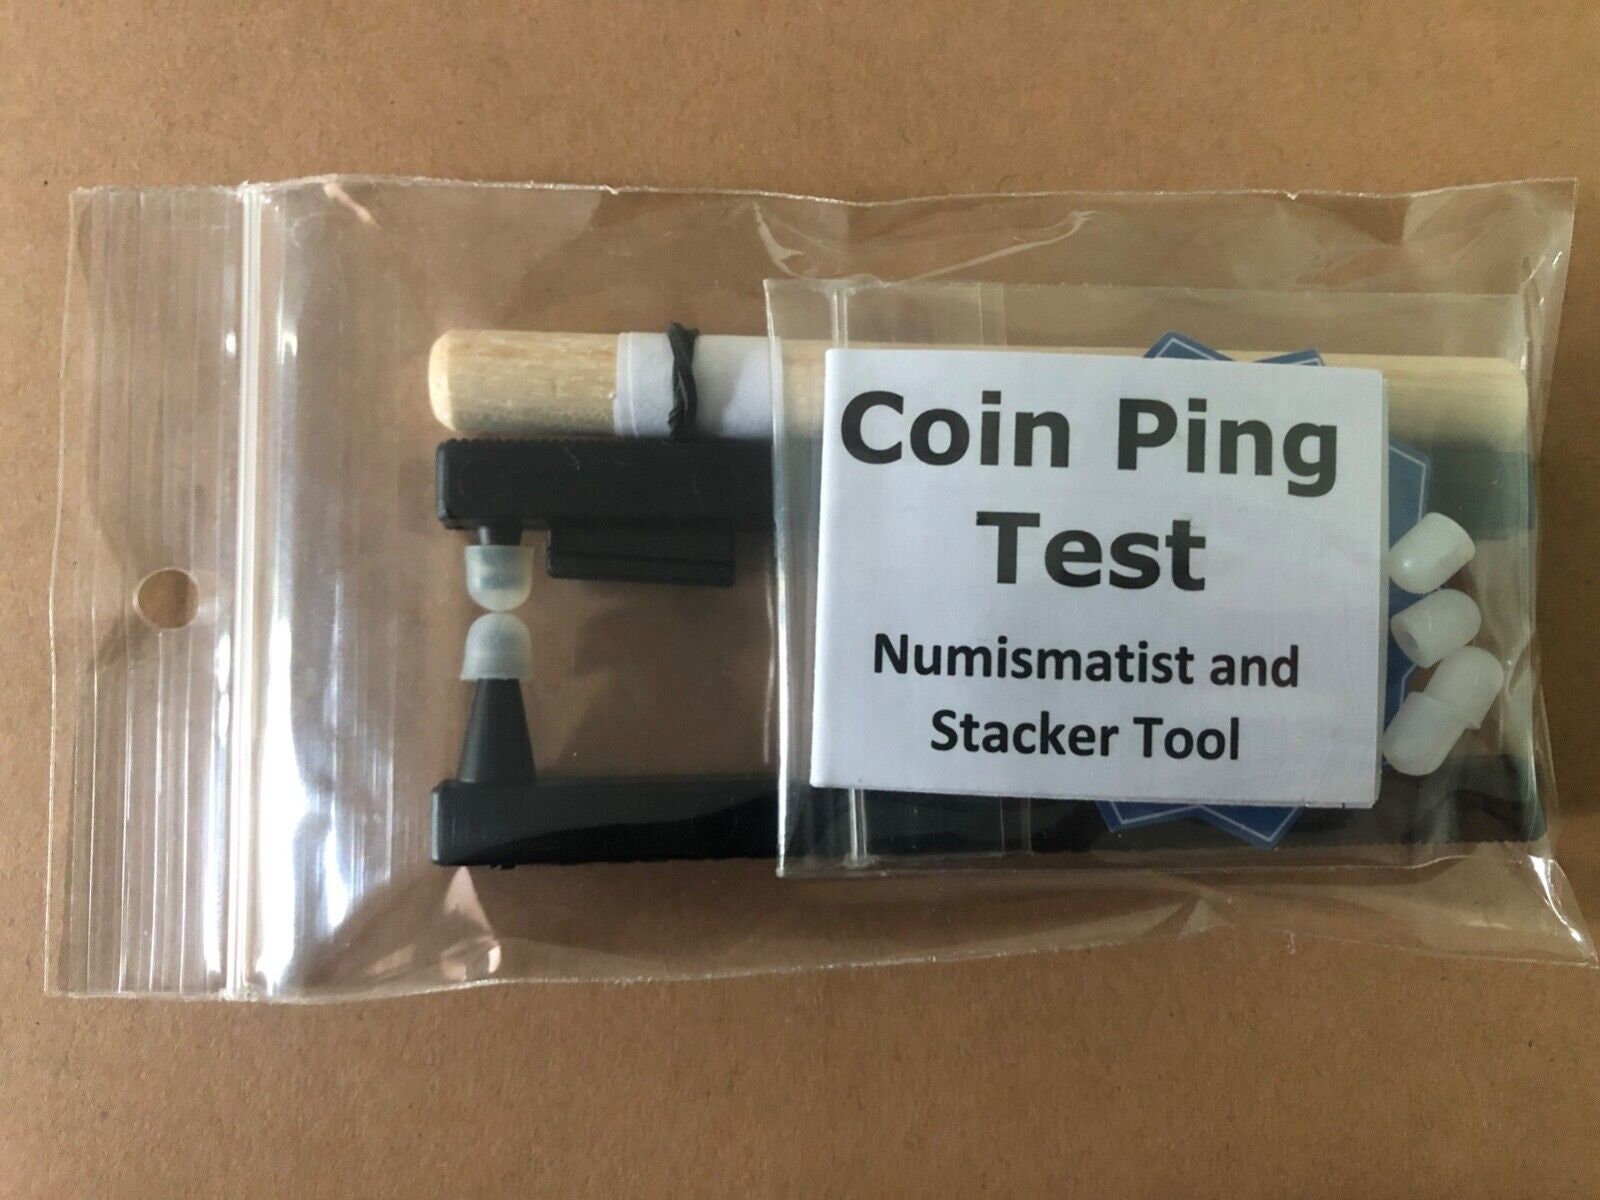 Buy The Pocket Pinger - Coin Ping Tester Online - Pure & Authentic